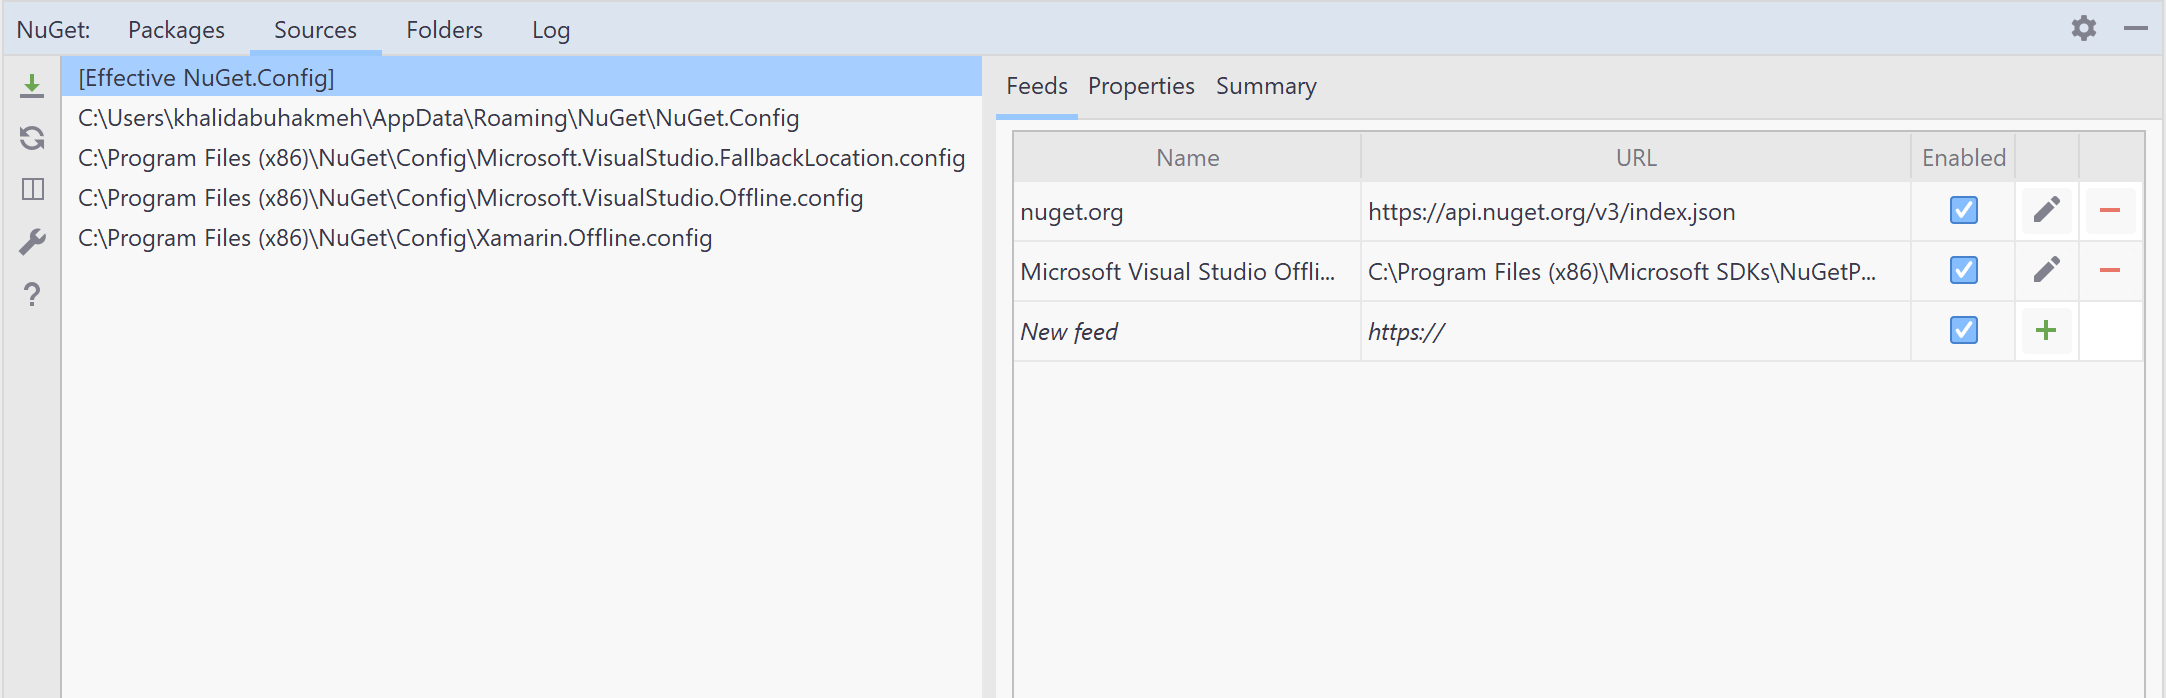 JetBrains Rider NuGet Tool Sources and Feeds